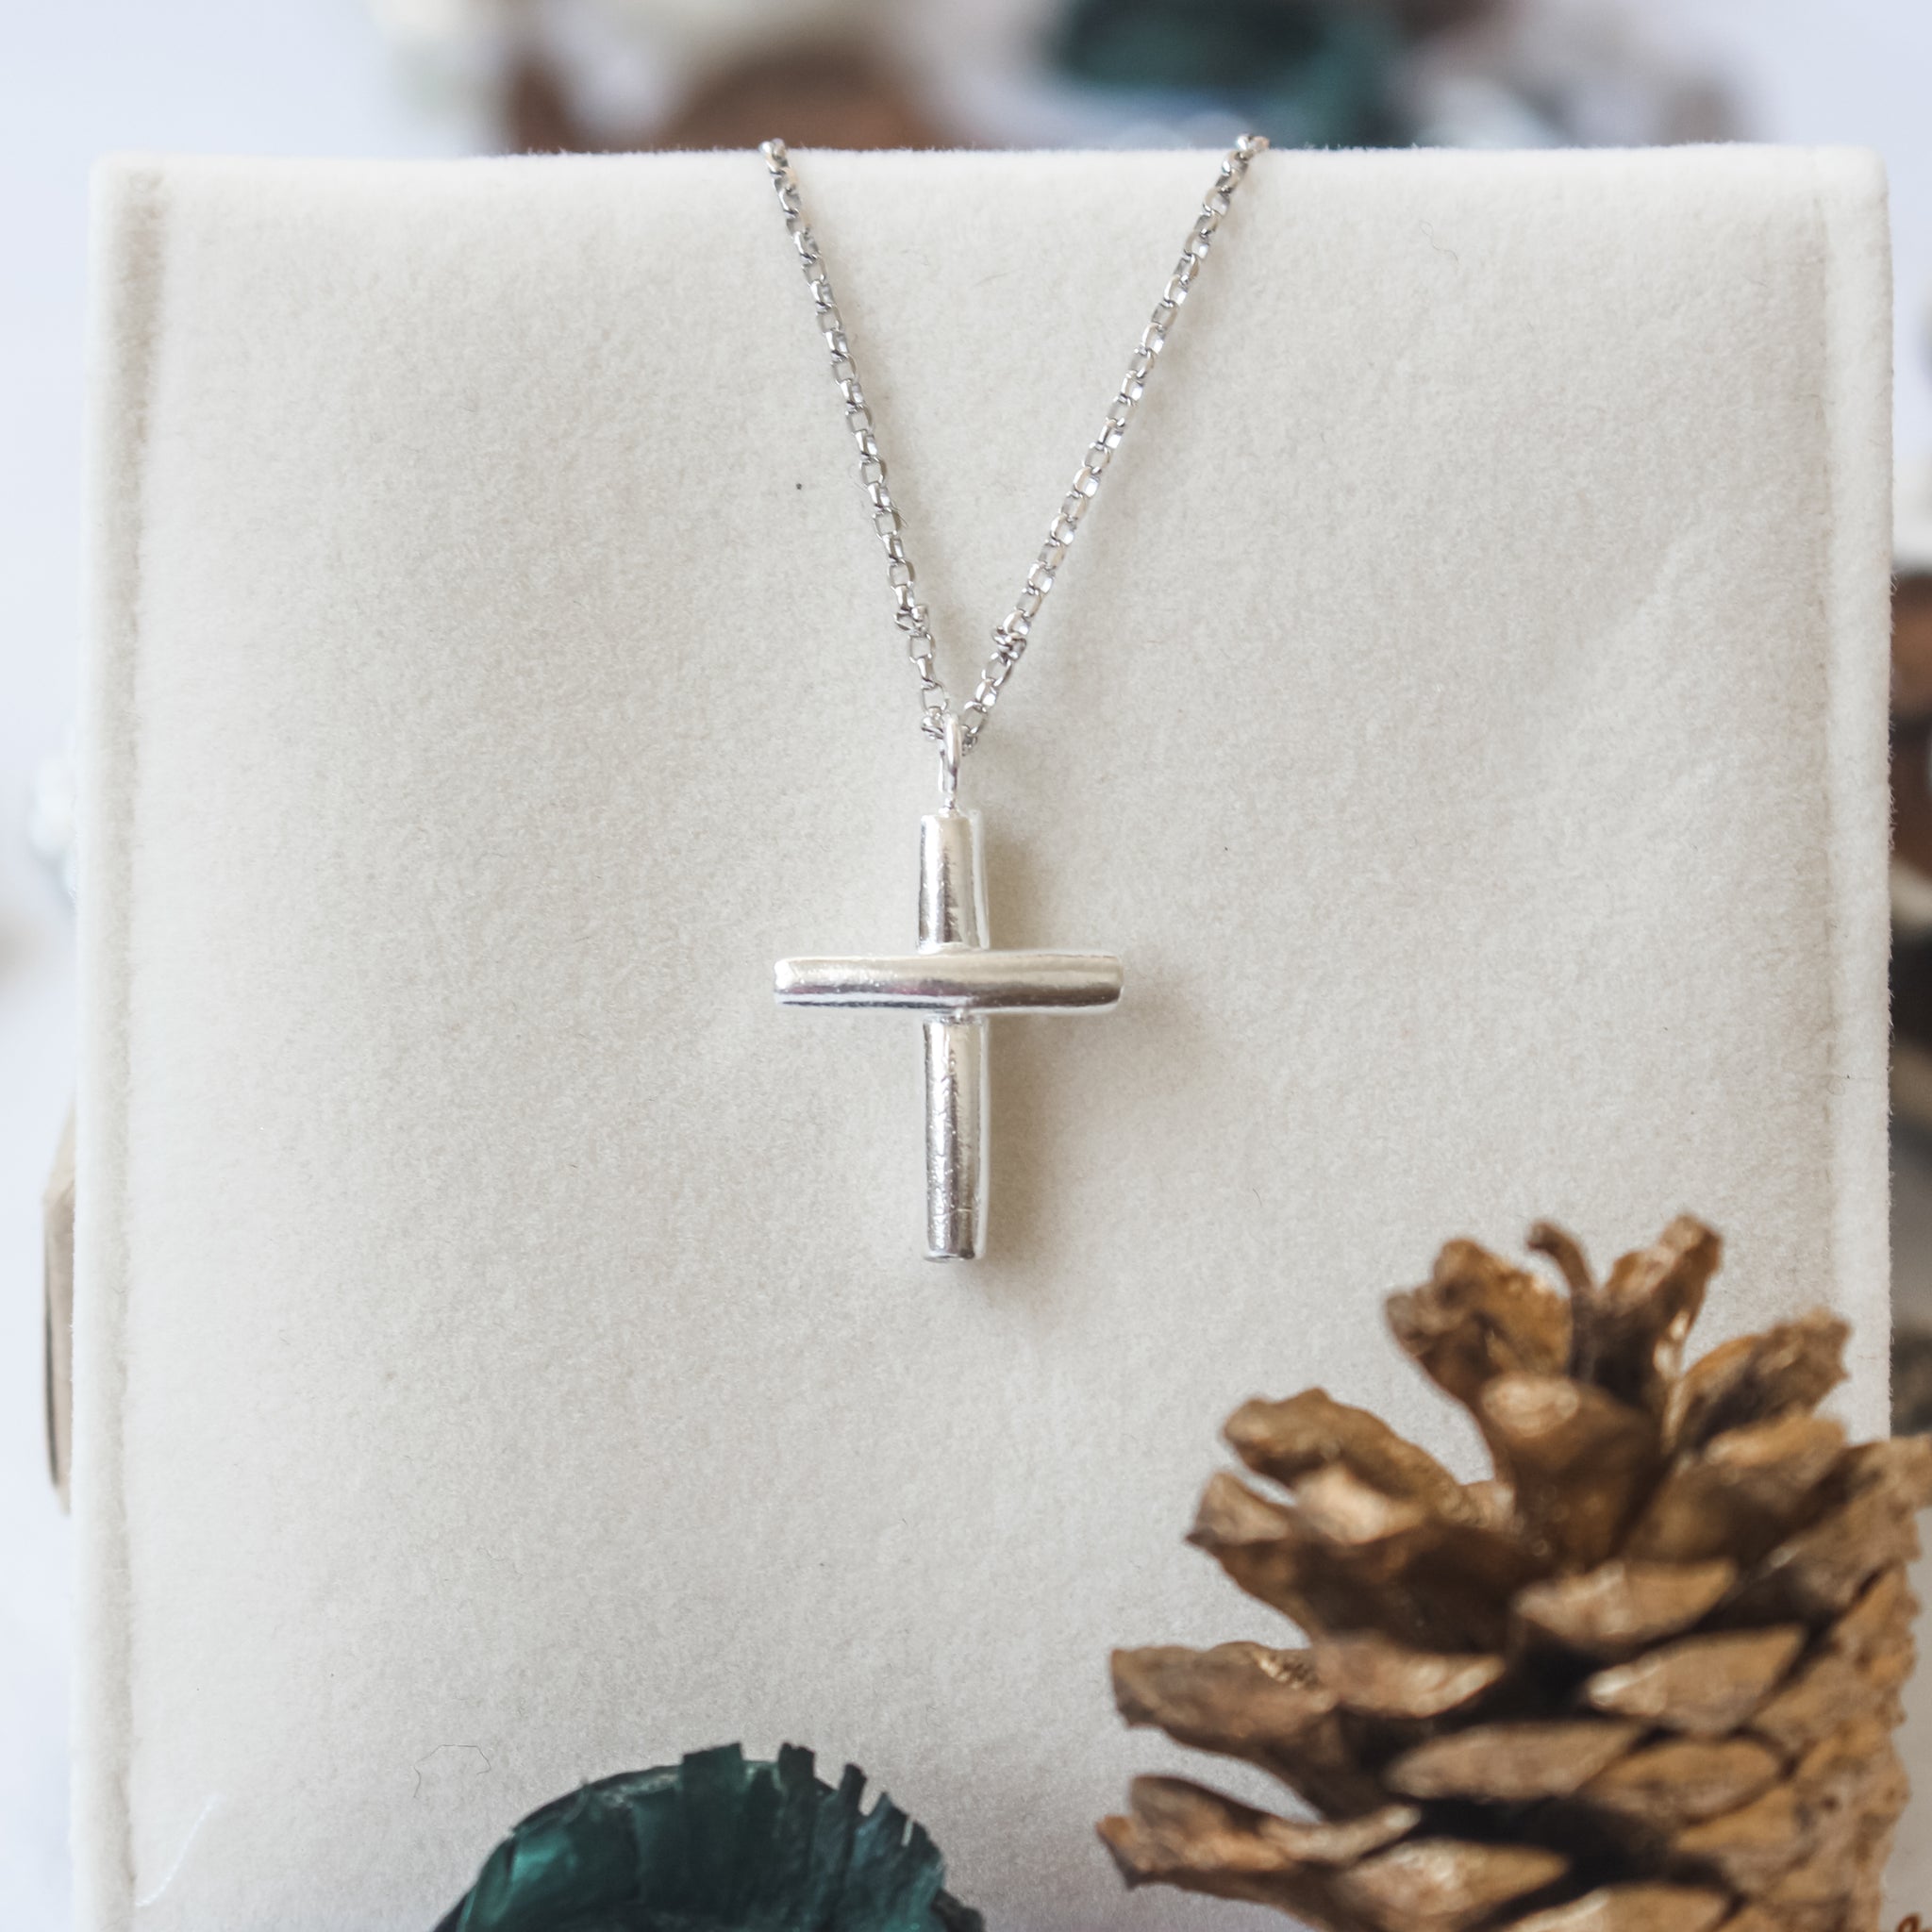 Cross Necklace in 925 Silver (Small) Plain or Engraved